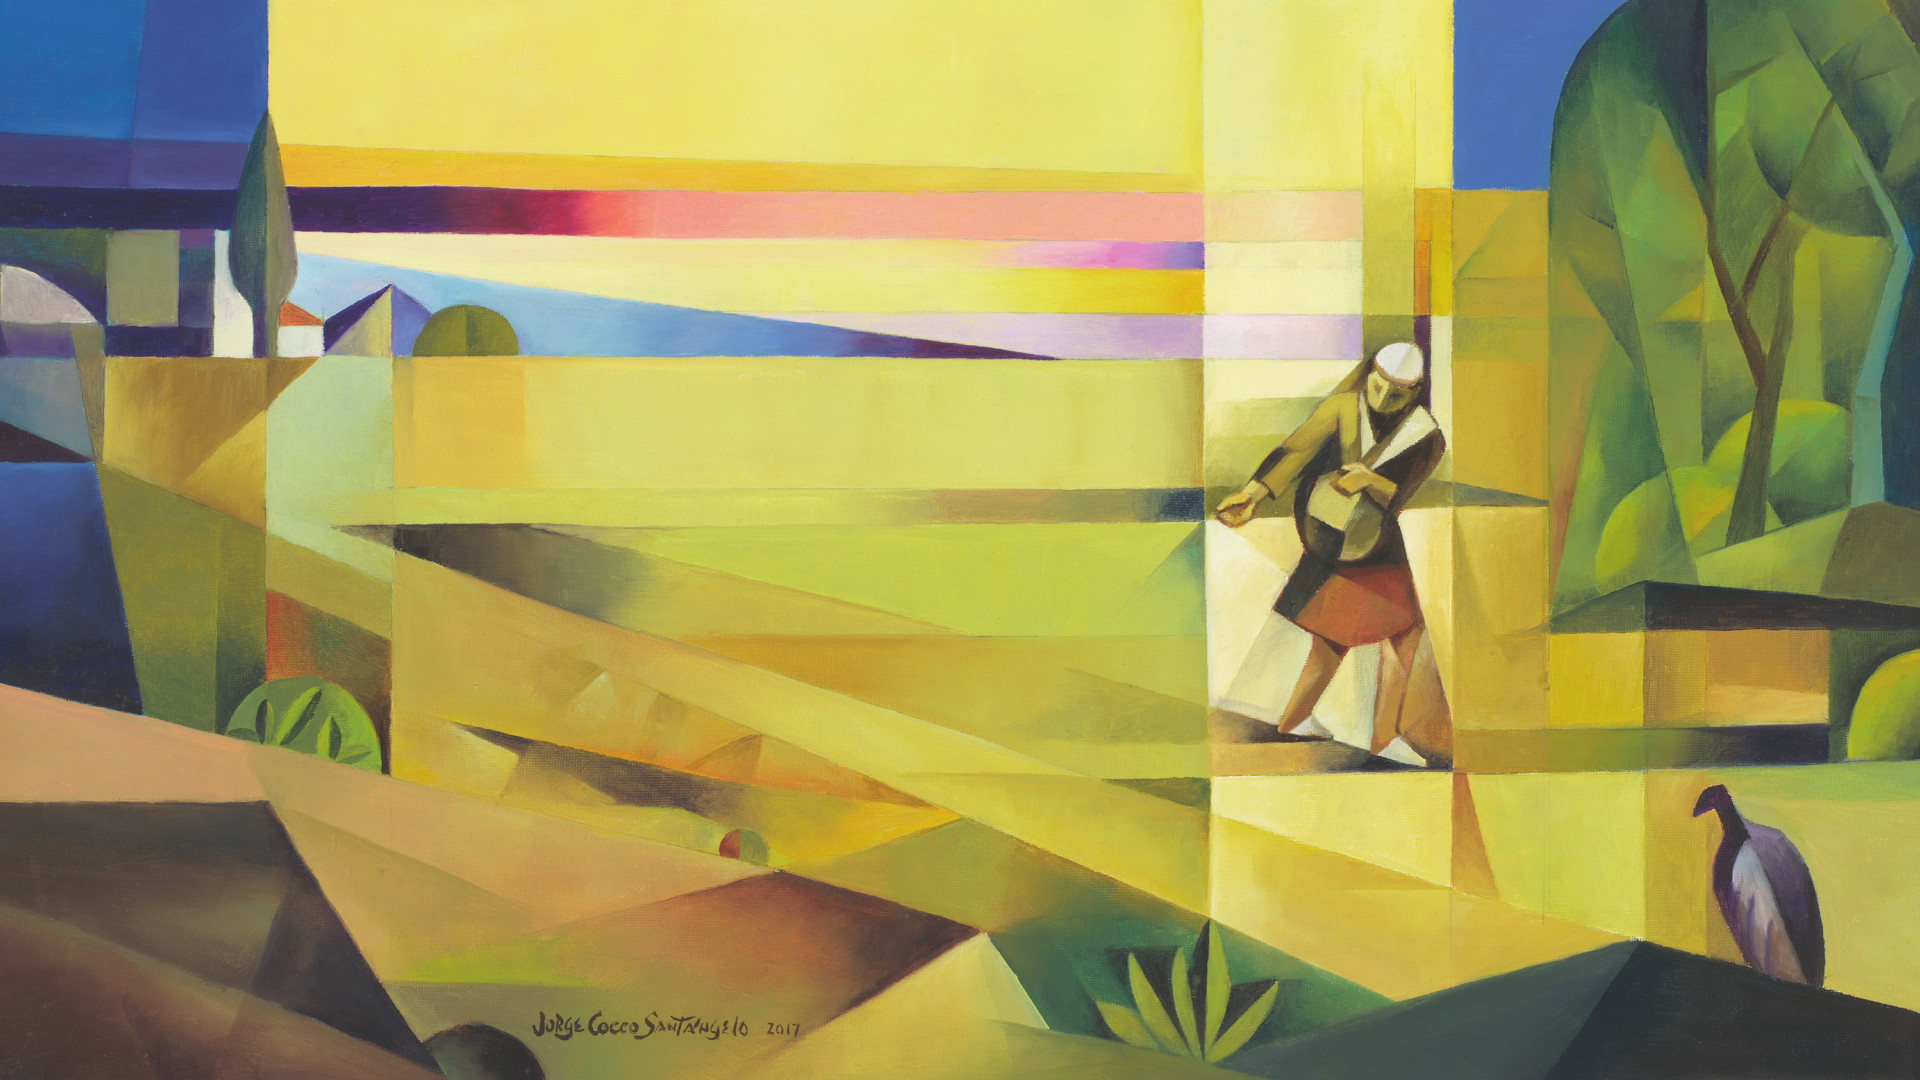 Jorge Cocco's painting, "The Sower," which depicts a man walking with a bag of seeds and tossing them into soil along his path, as described in Jesus's parable.